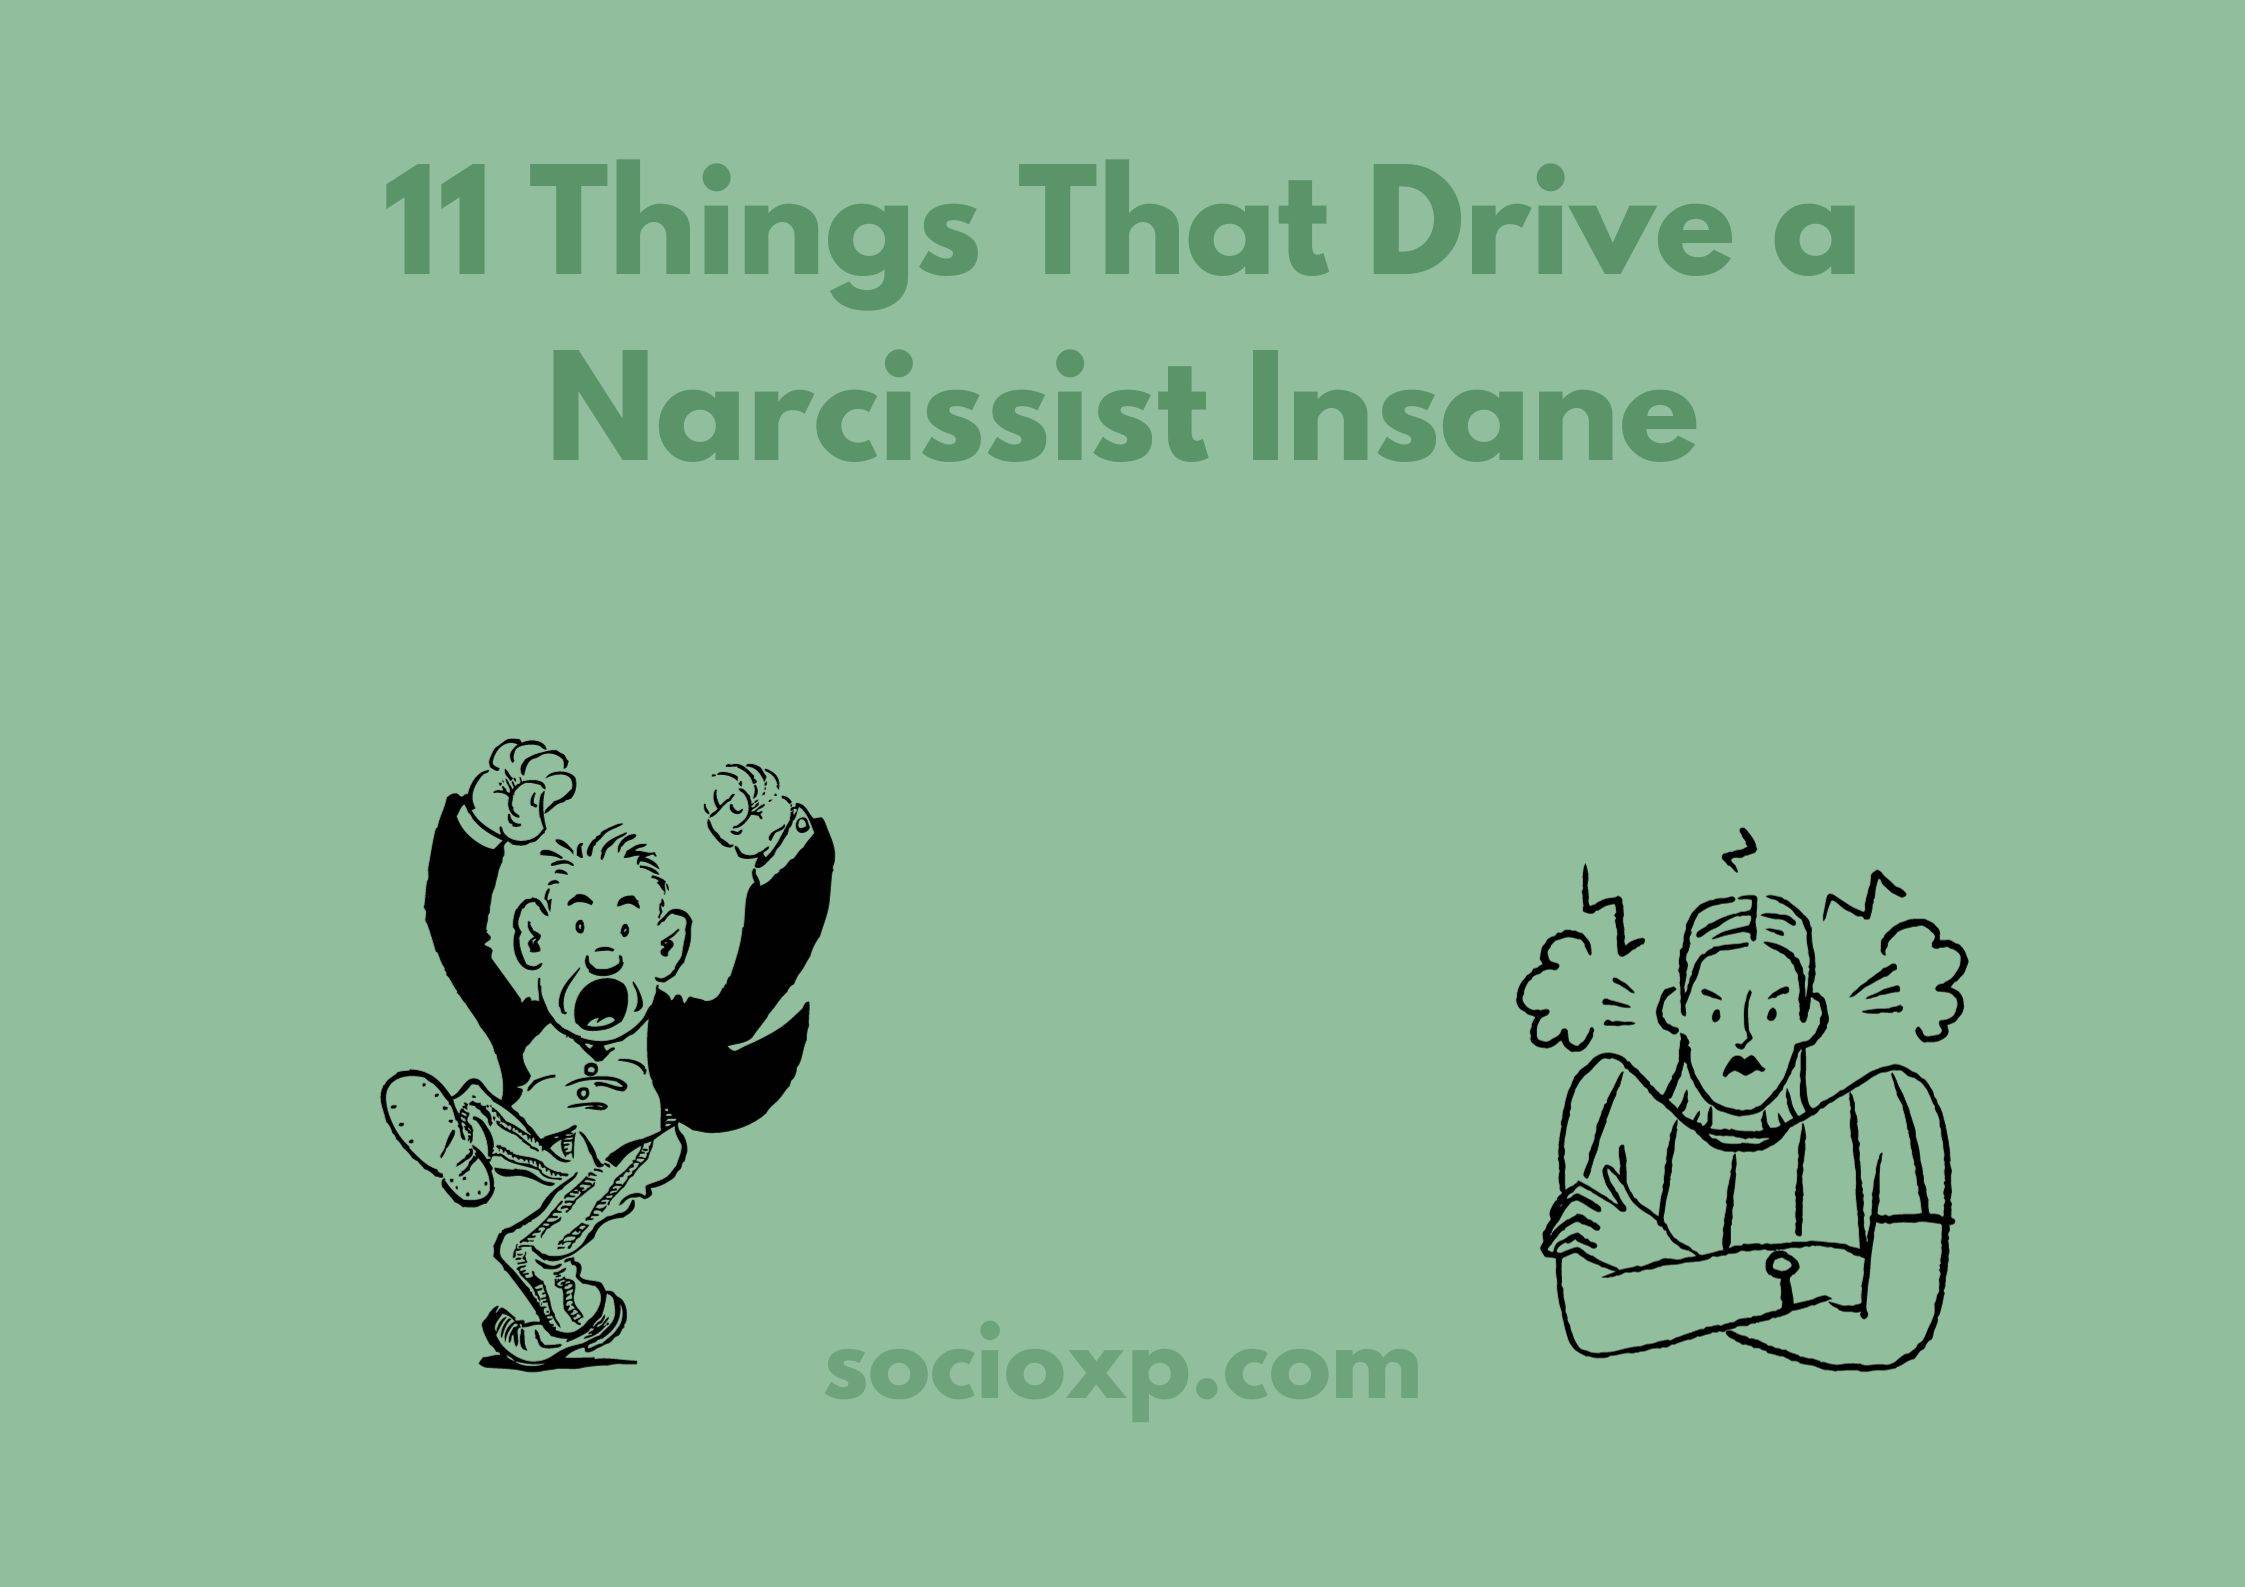 11 Things That Drive a Narcissist Insane